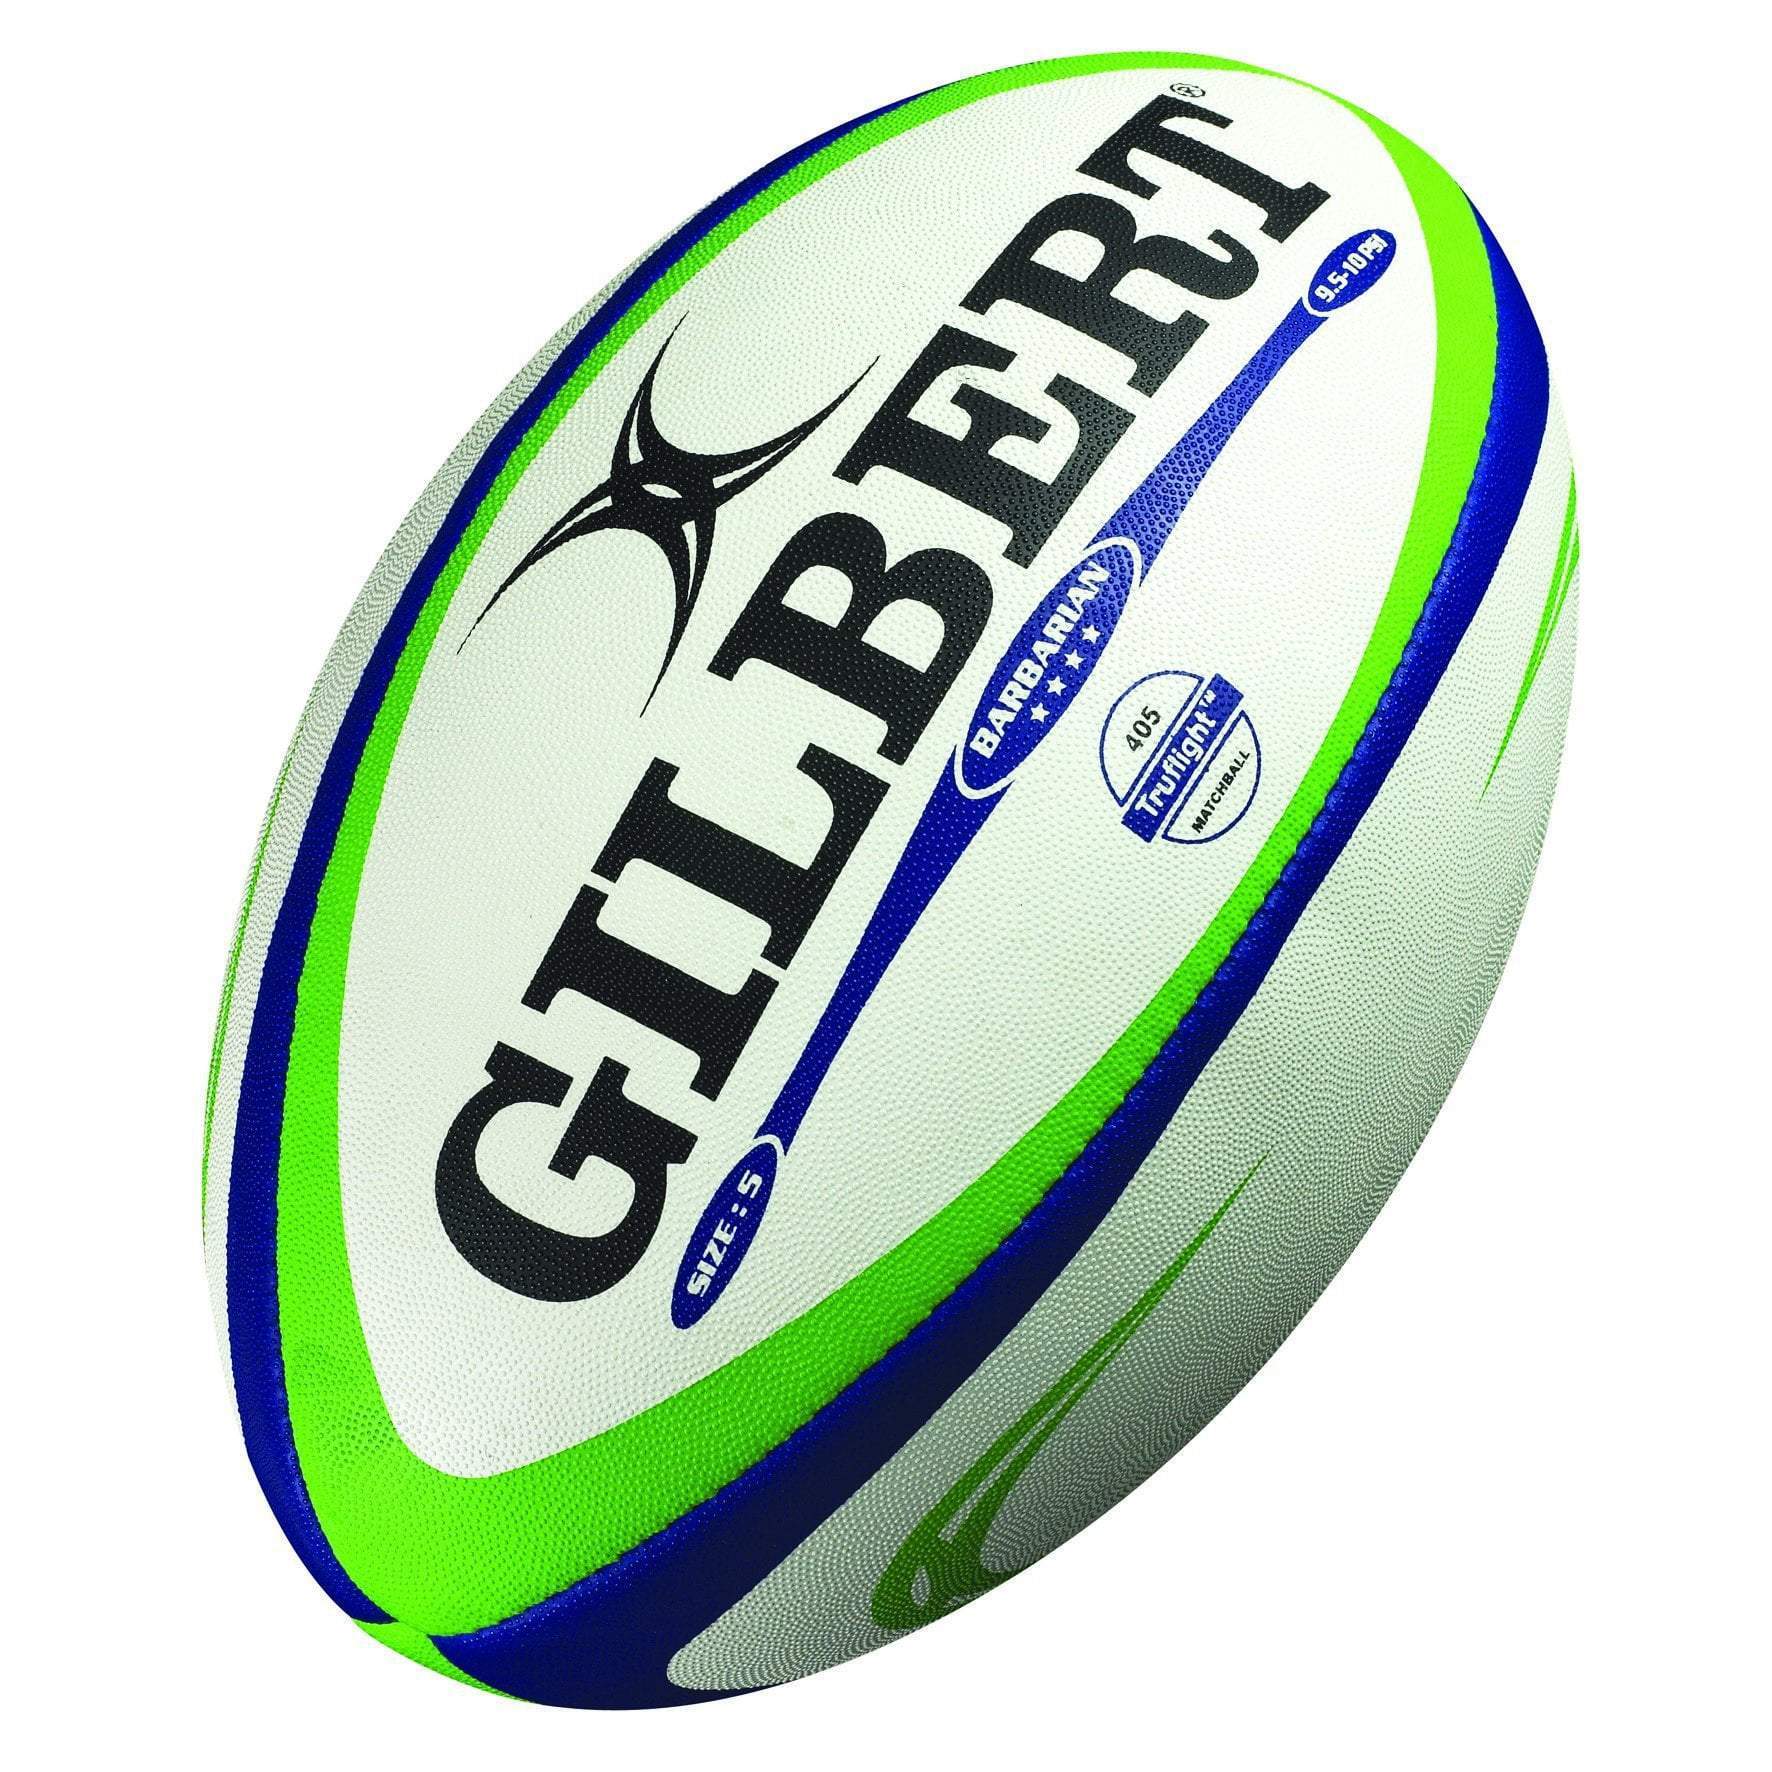 Rugby Imports Gilbert Barbarian Trueflight Rugby Match Ball